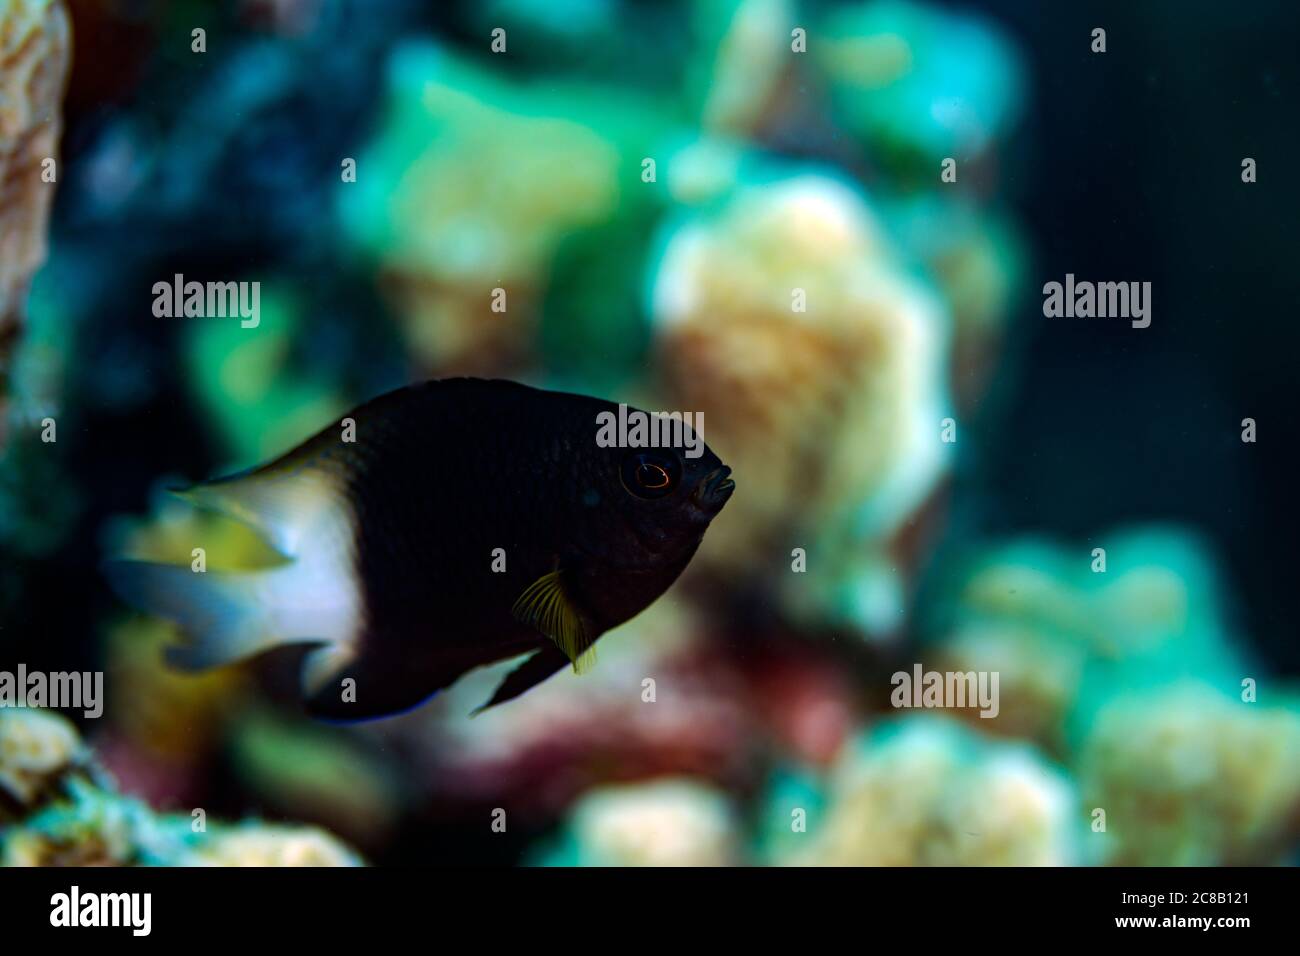 A bicolor damselfish on the reef in Bonaire, The Netherlands. Stegastes partitus Stock Photo